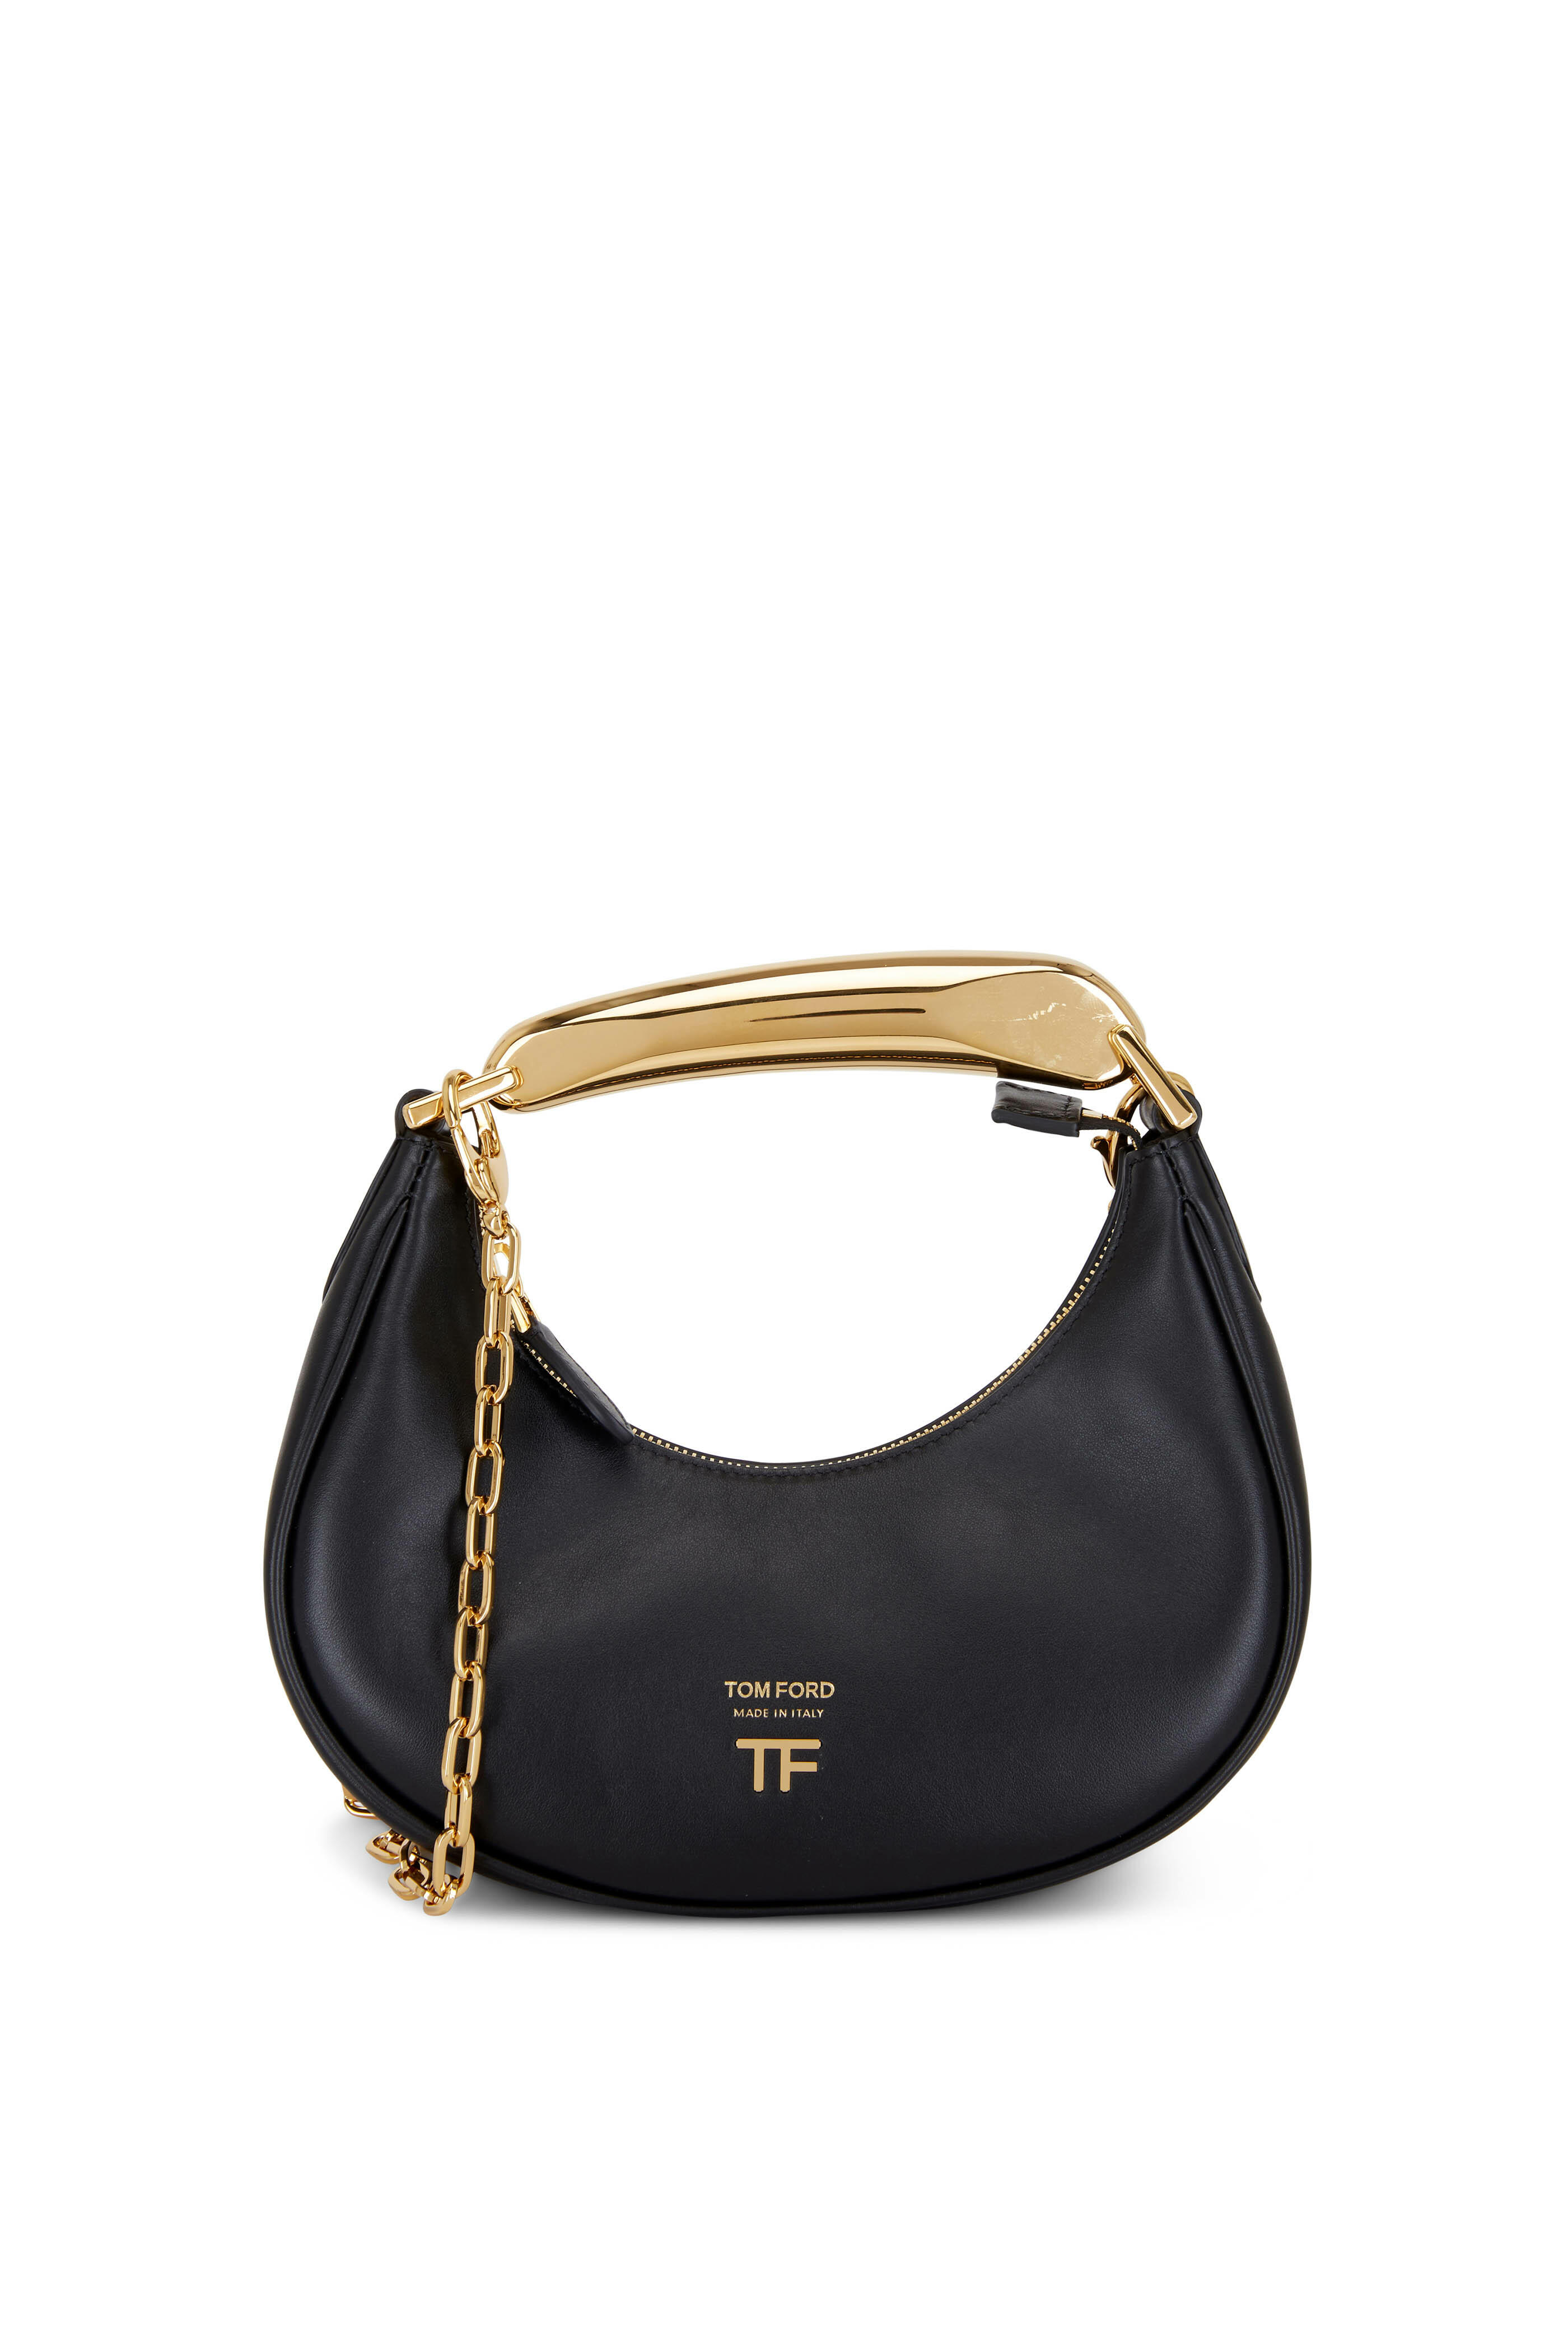 TOM FORD Black Leather Pouch